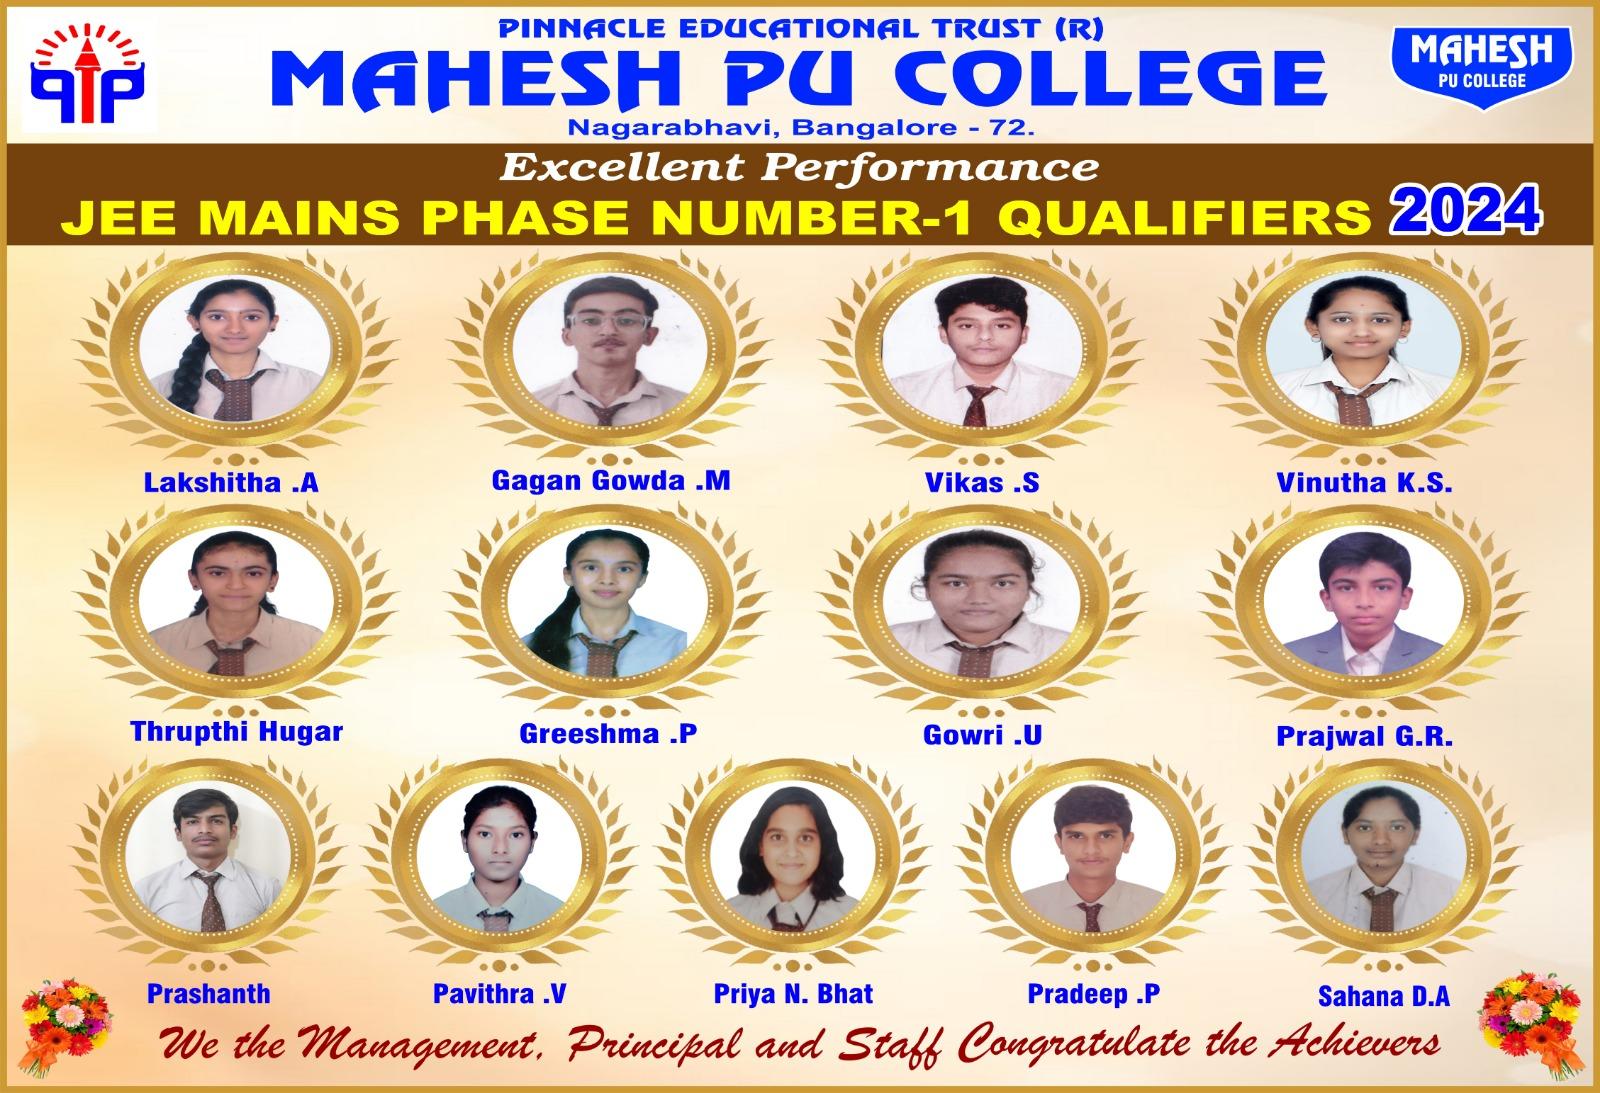 JEE MAINS QUALIFIERS-2024